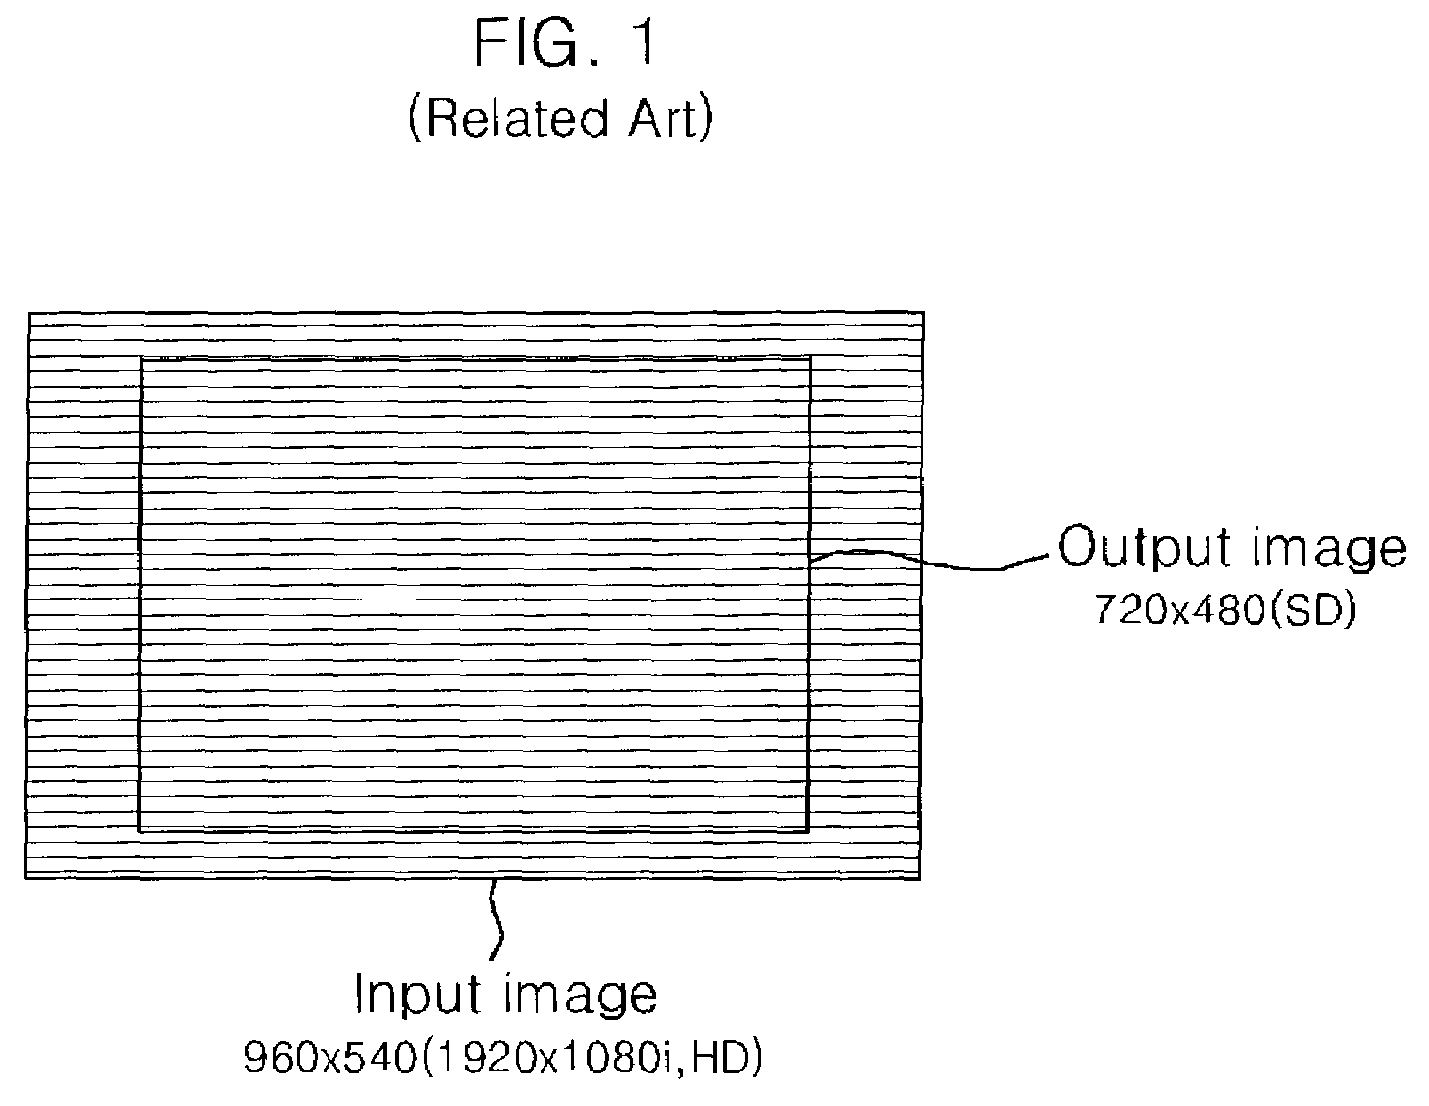 Image display apparatus and operating method thereof